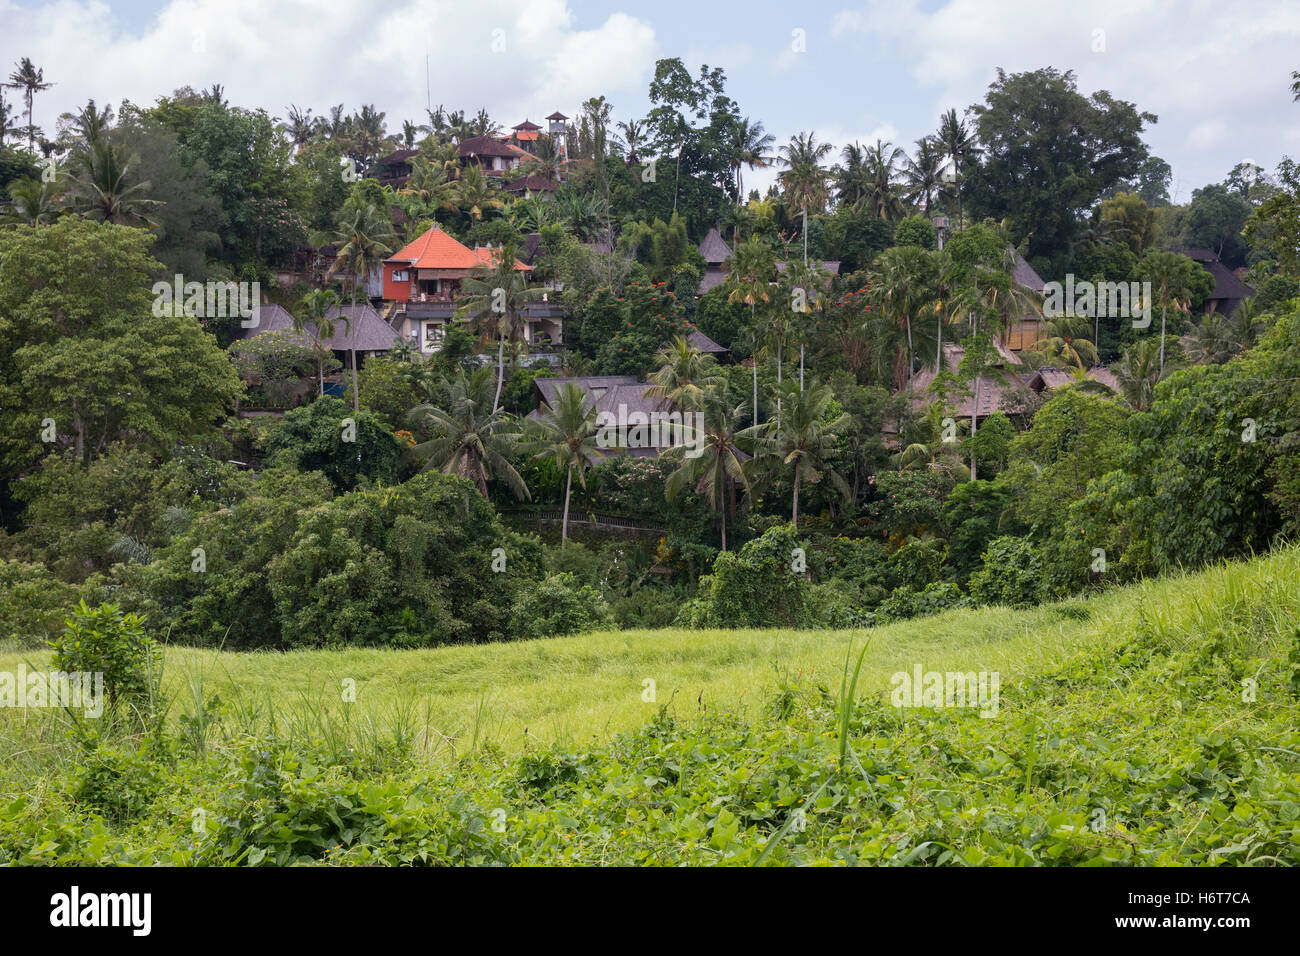 Resorts and houses surrounded by palm trees, viewed from the Campuhan Ridge Walk. Ubud, Bali, Indonesia. Stock Photo